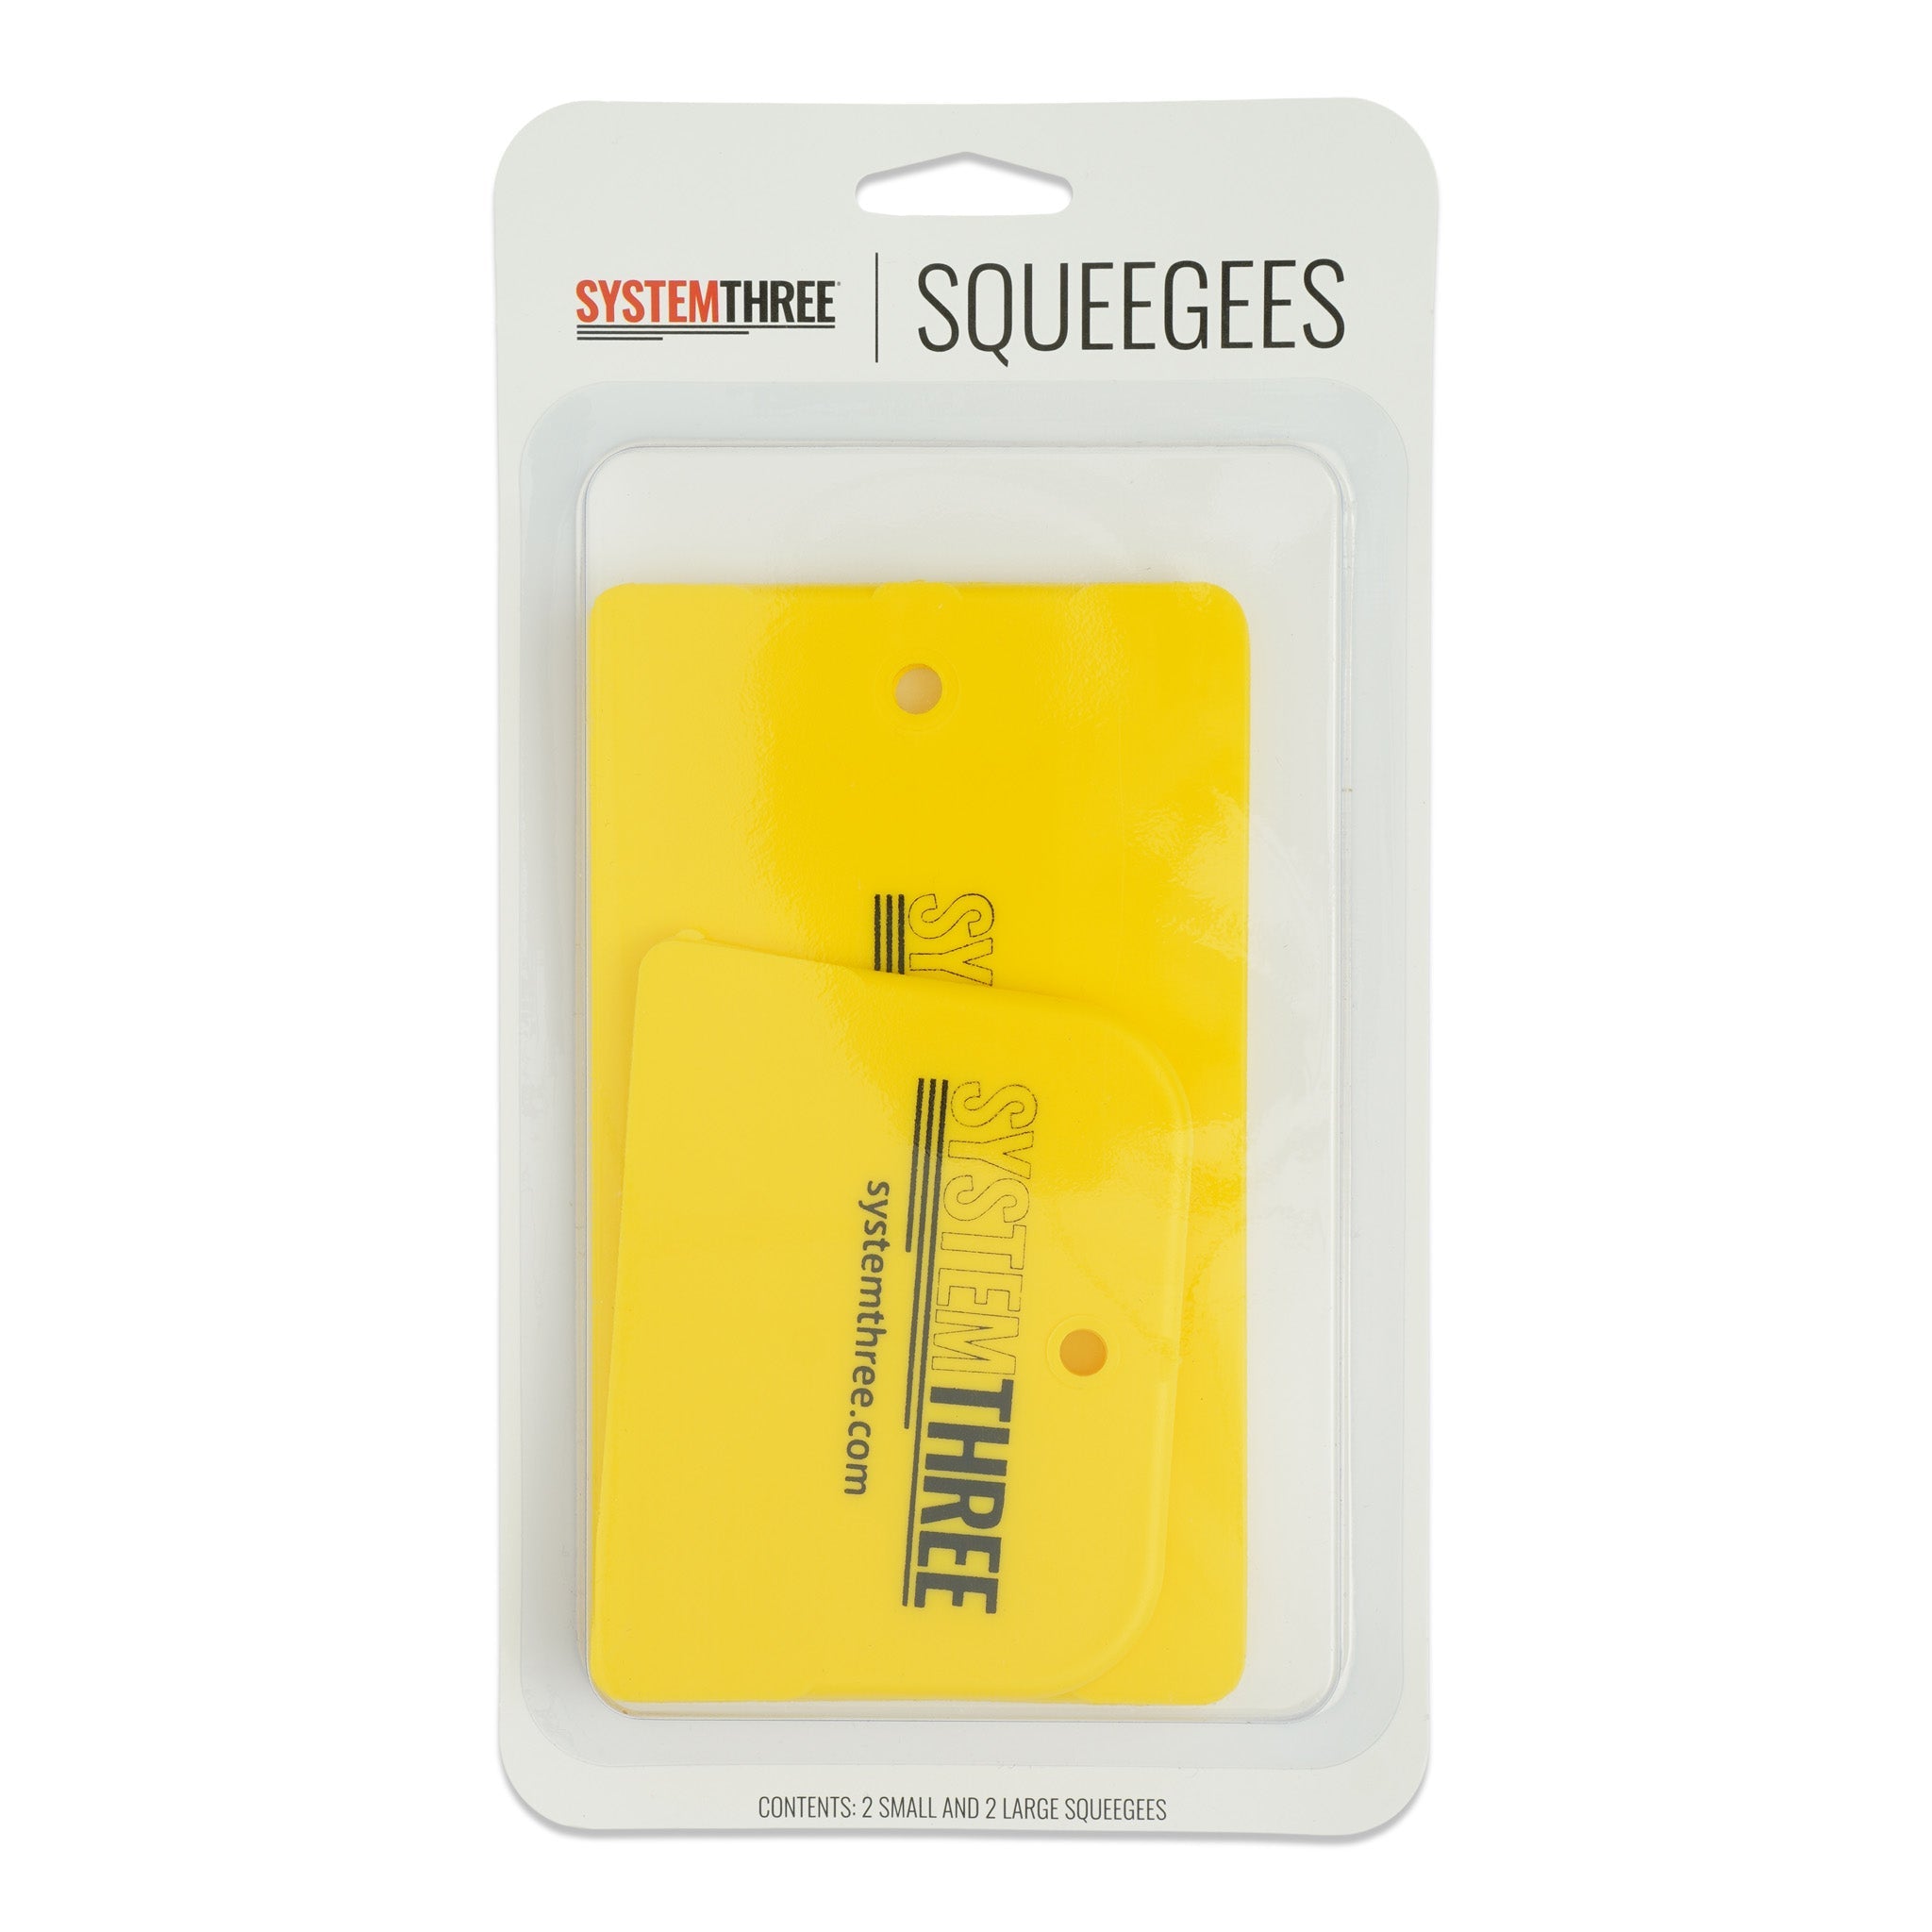 Squeegee 2.5 x 4.5